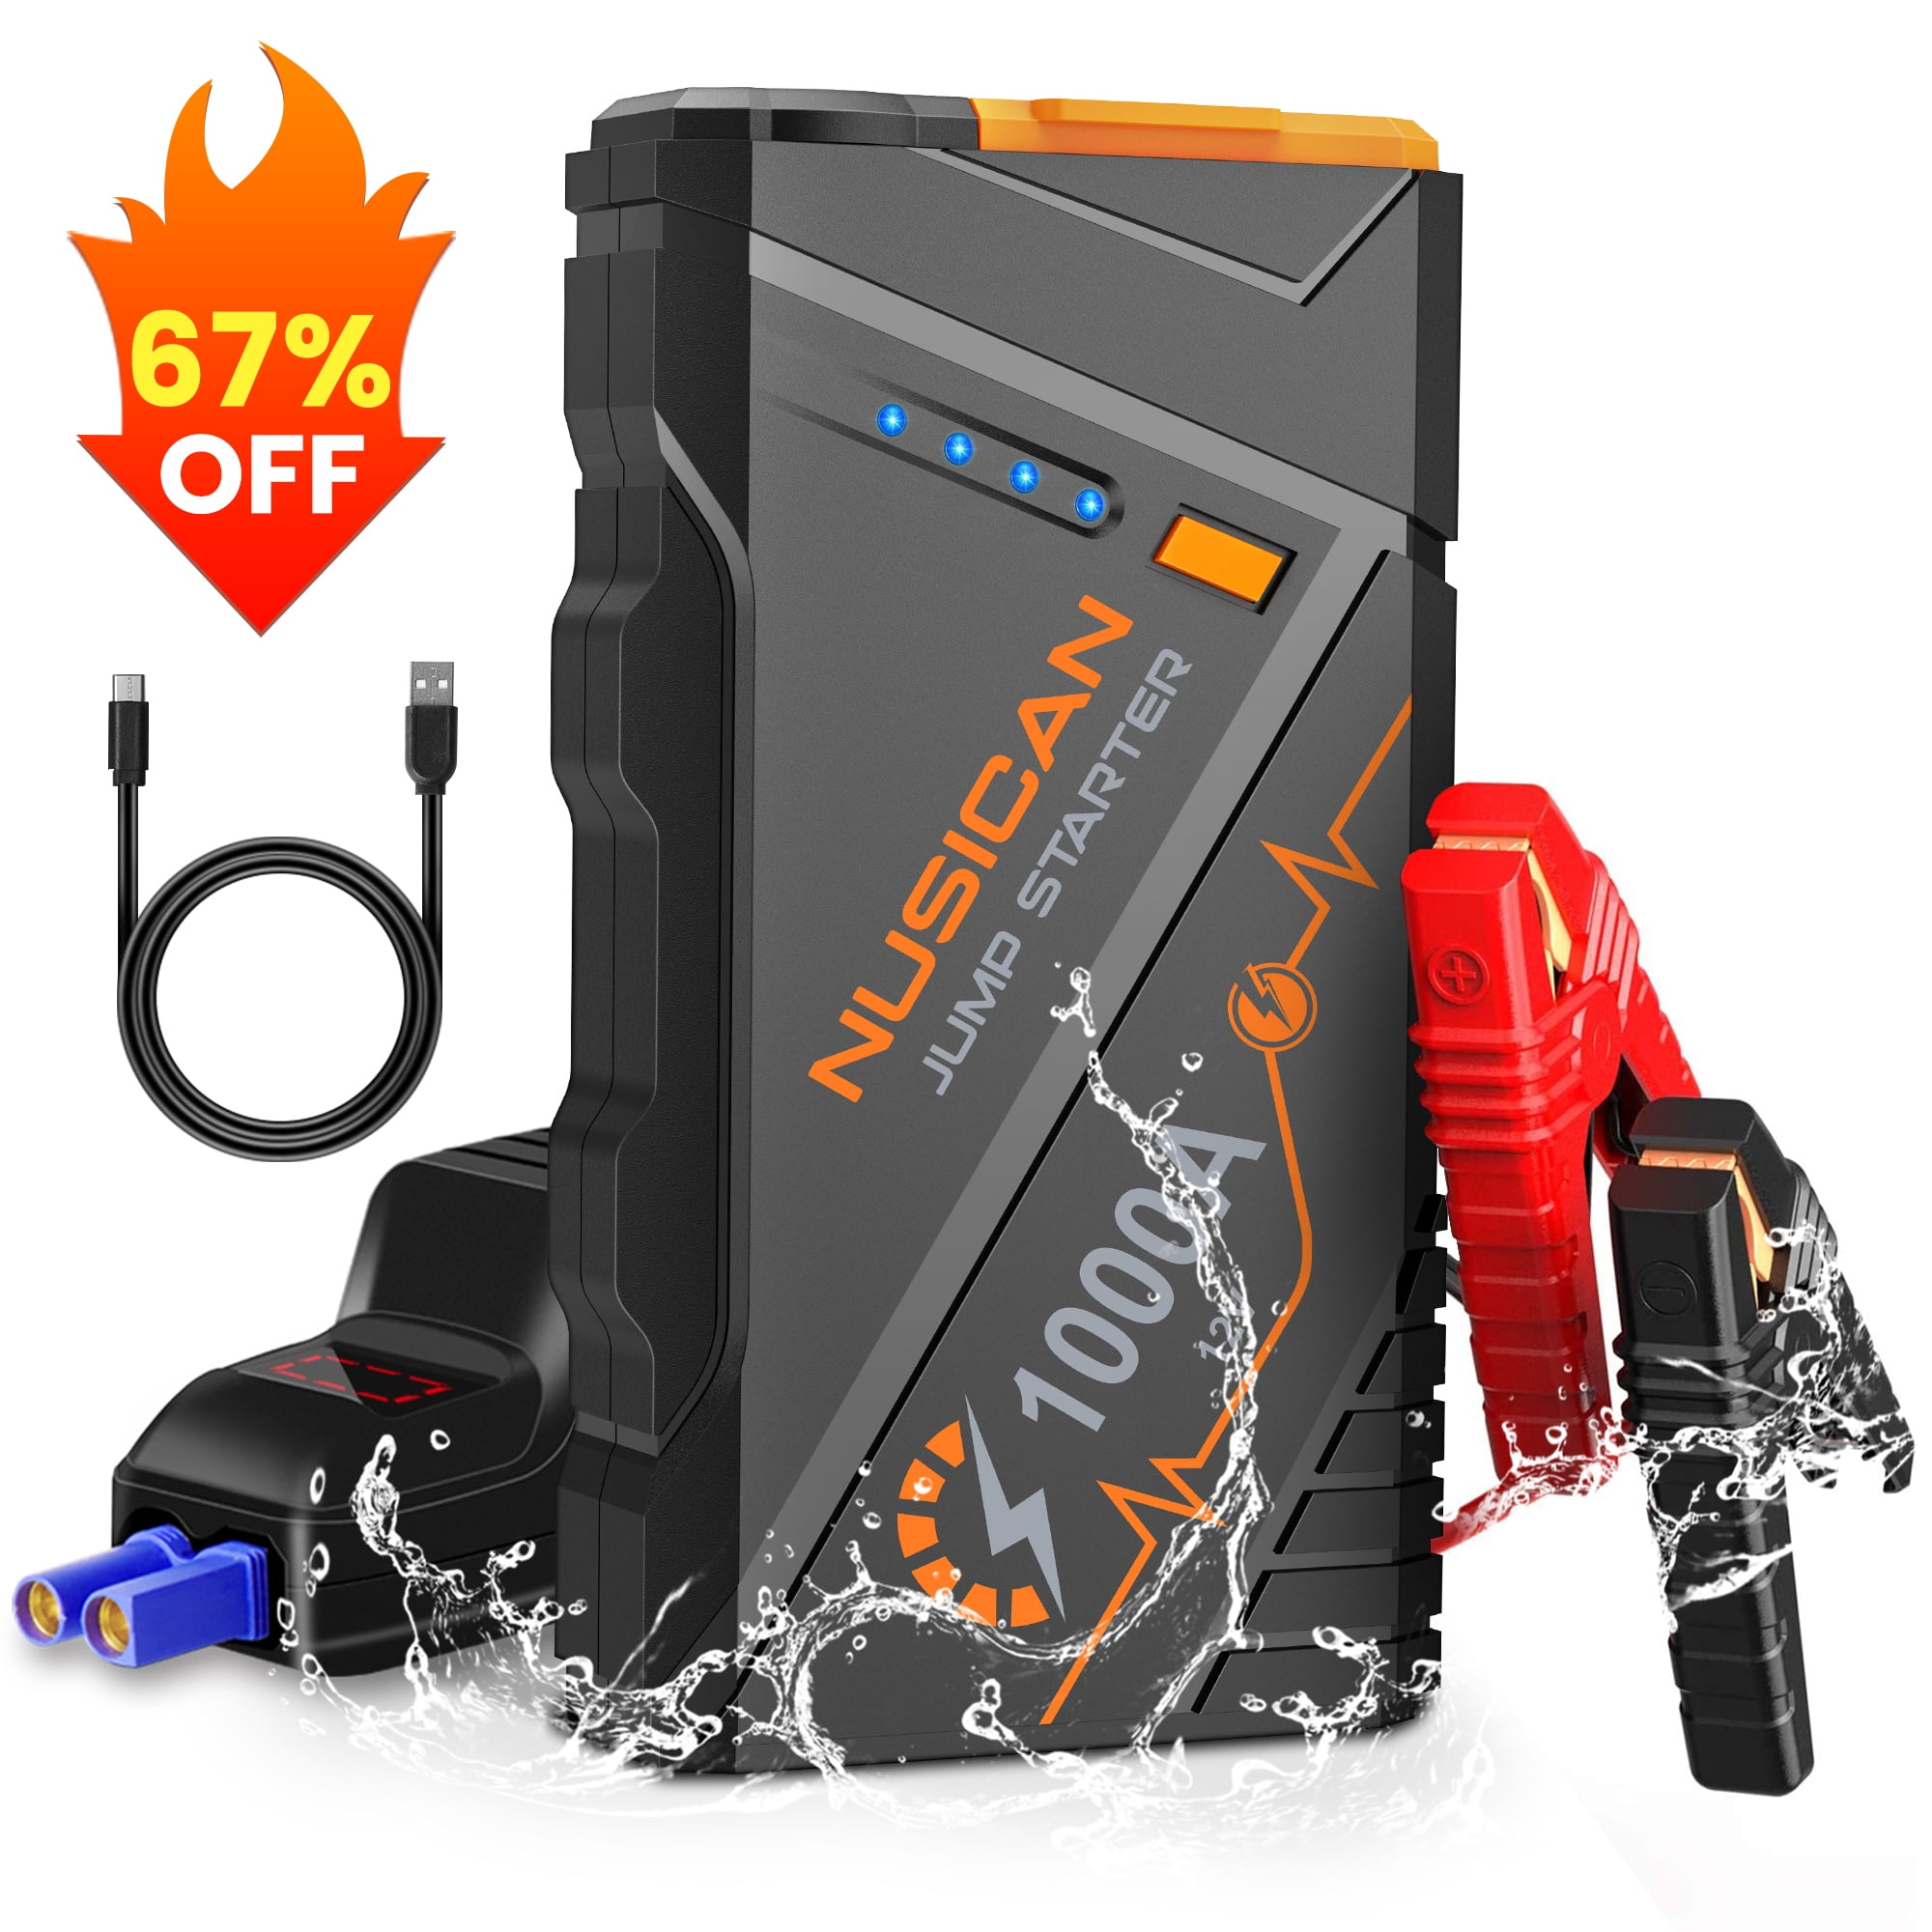 NUSICAN Car Battery Jump Starter, 1000A Peak 12V Auto Lithium Jump Starter,  Portable Car Battery Booster Power Pack for up 7L Gas or 5.5L Diesel  Engine, LED Flashlight & USB Quick Charge 